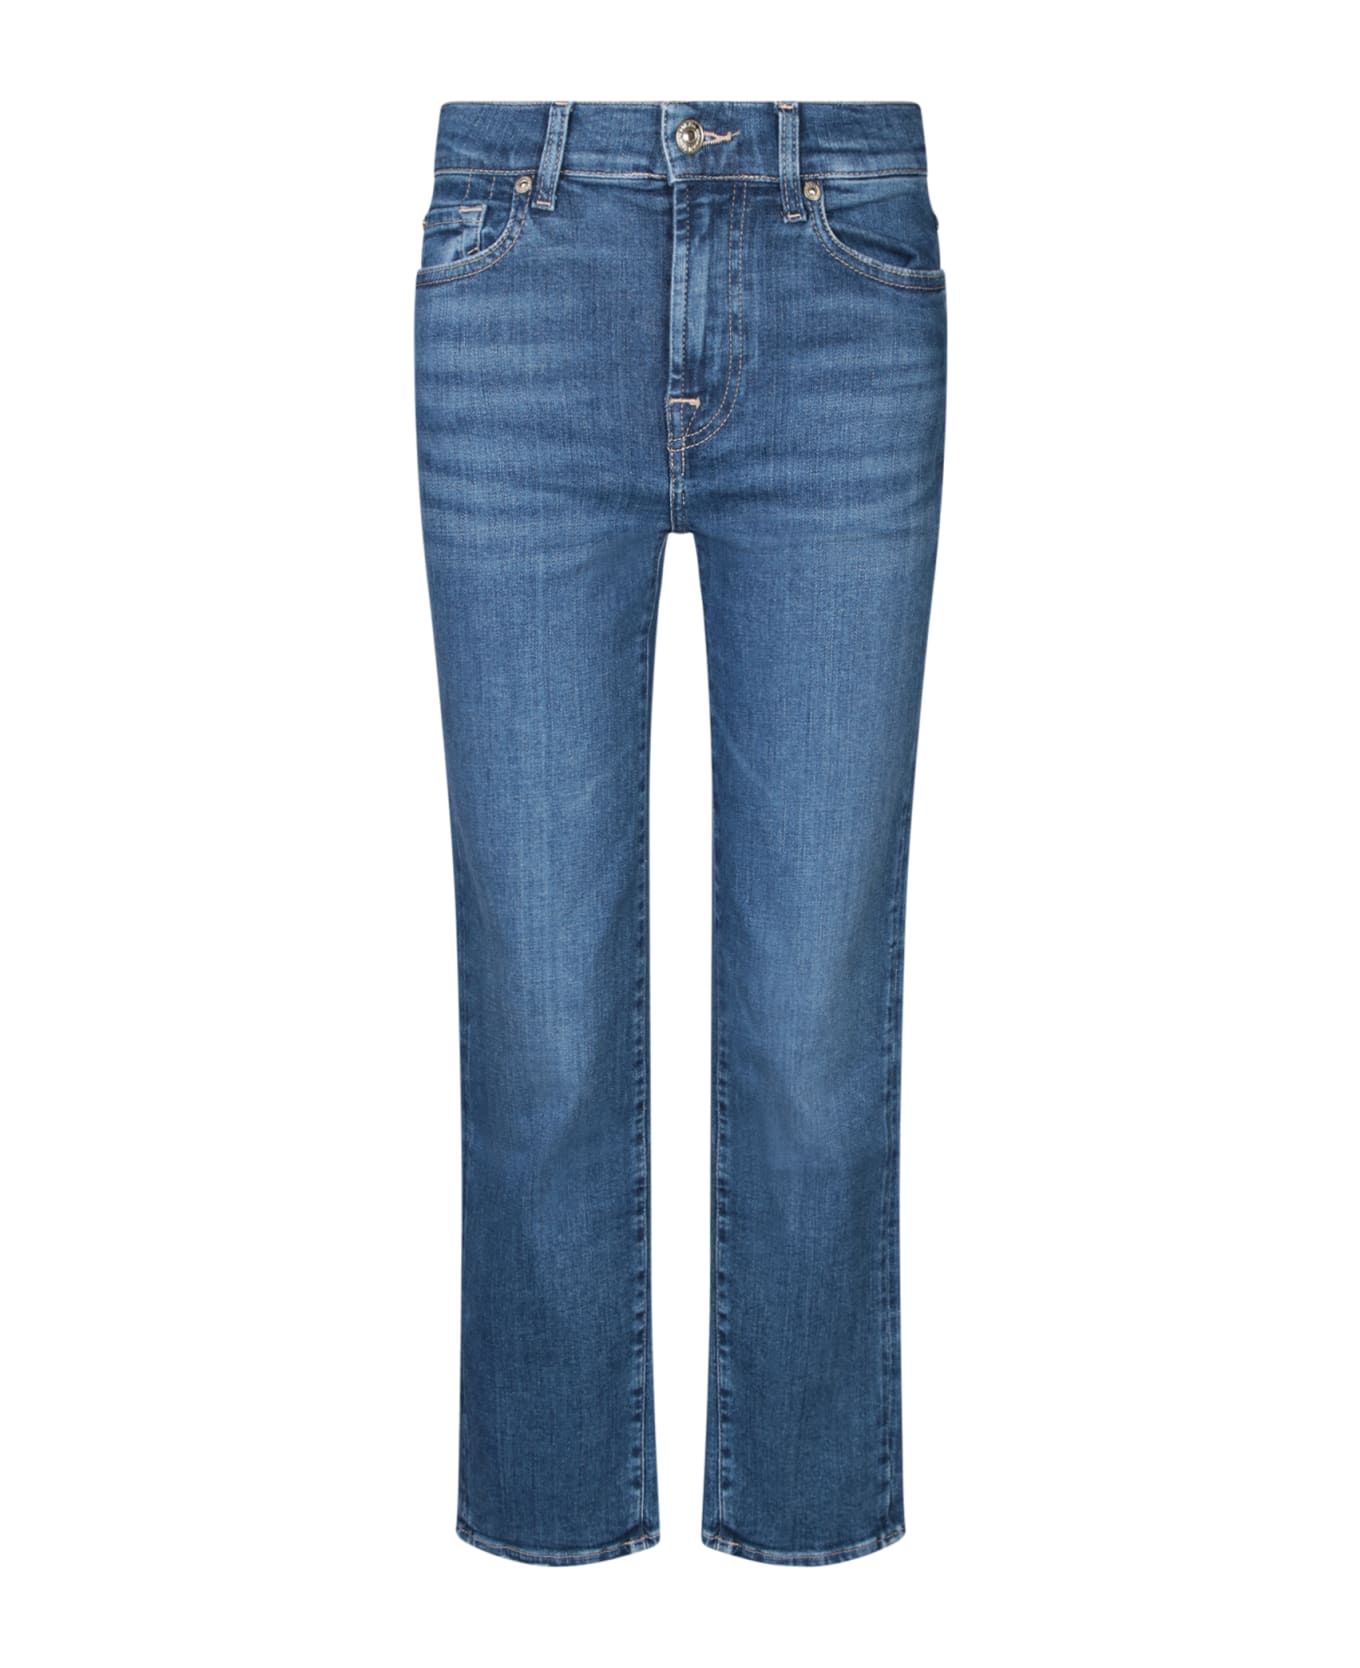 7 For All Mankind Straight Crop Blue Jeans - Blue